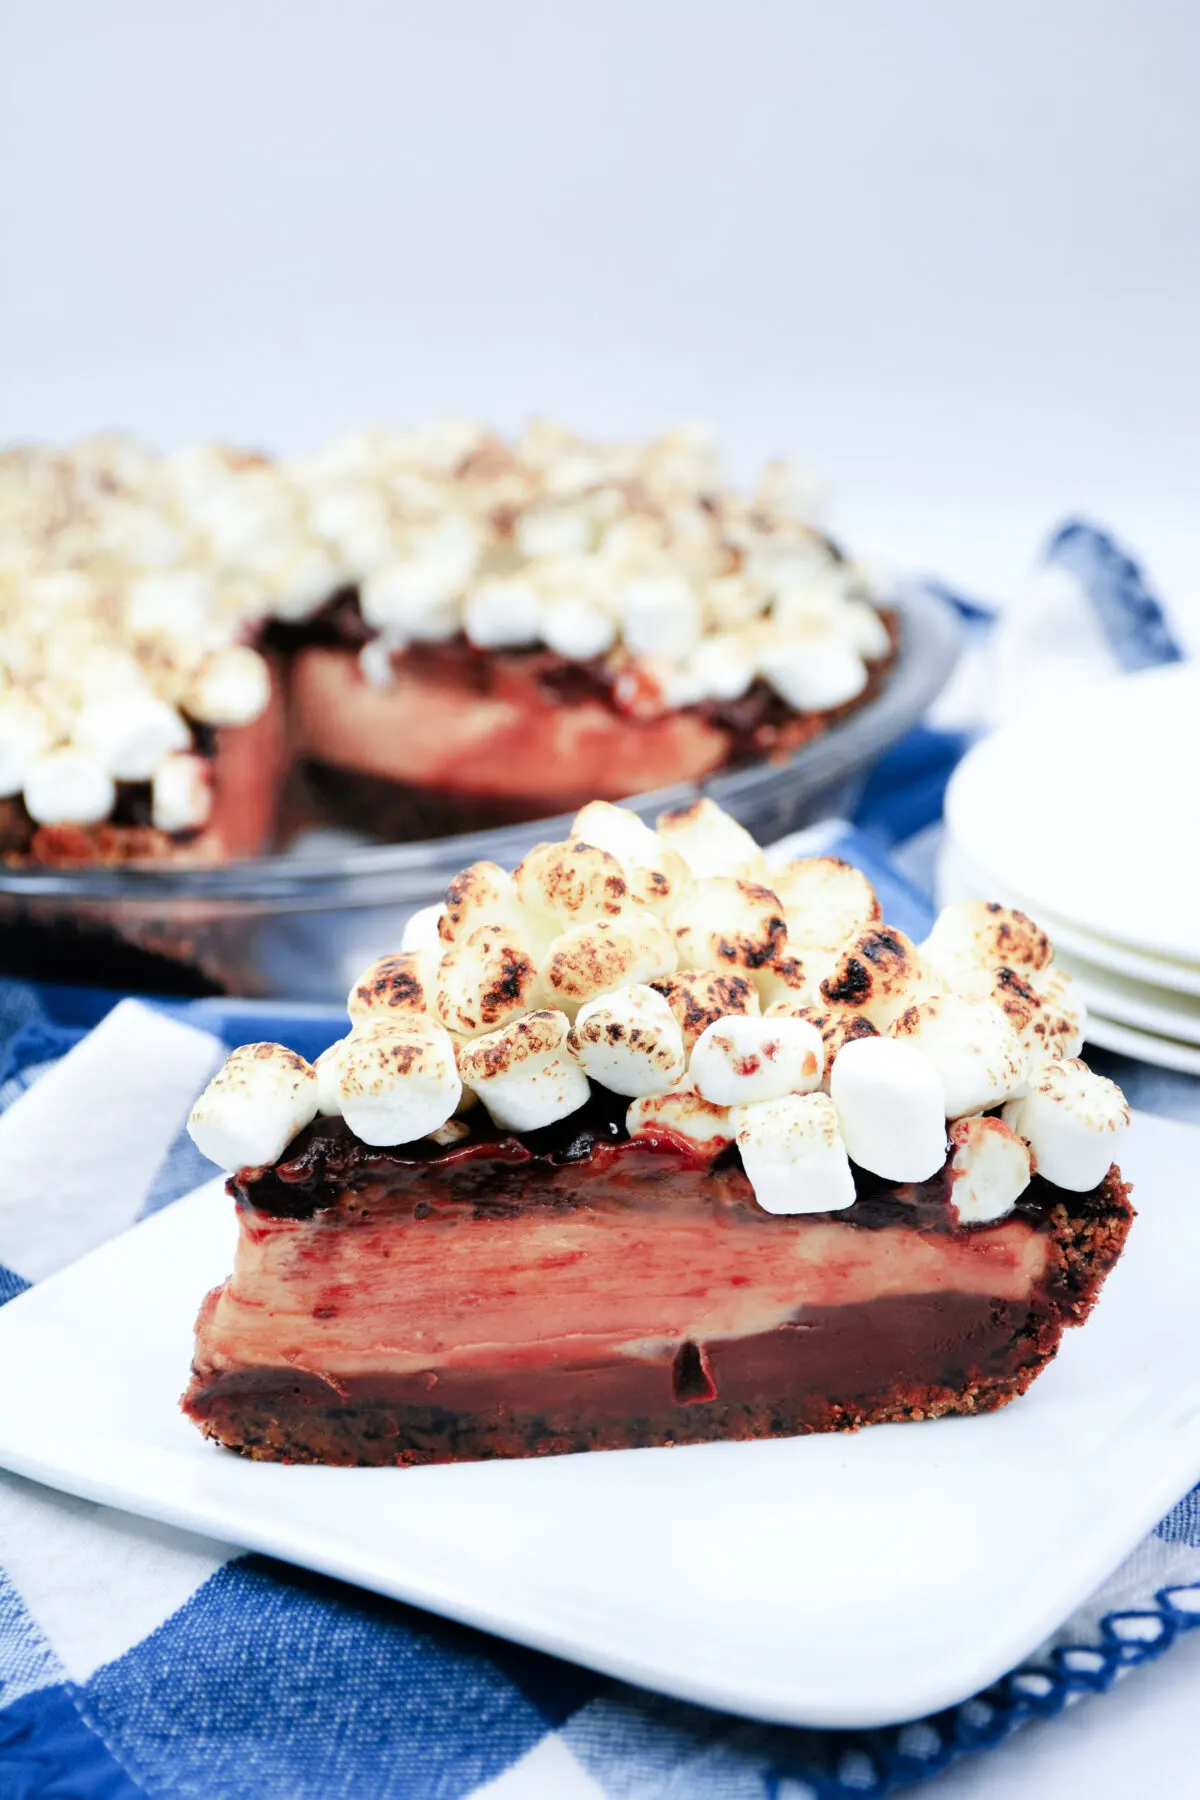 Indulge in our Texas Flood Pie recipe - layers of chocolate ganache and peanut butter mousse all topped with a heap of toasted marshmallows!